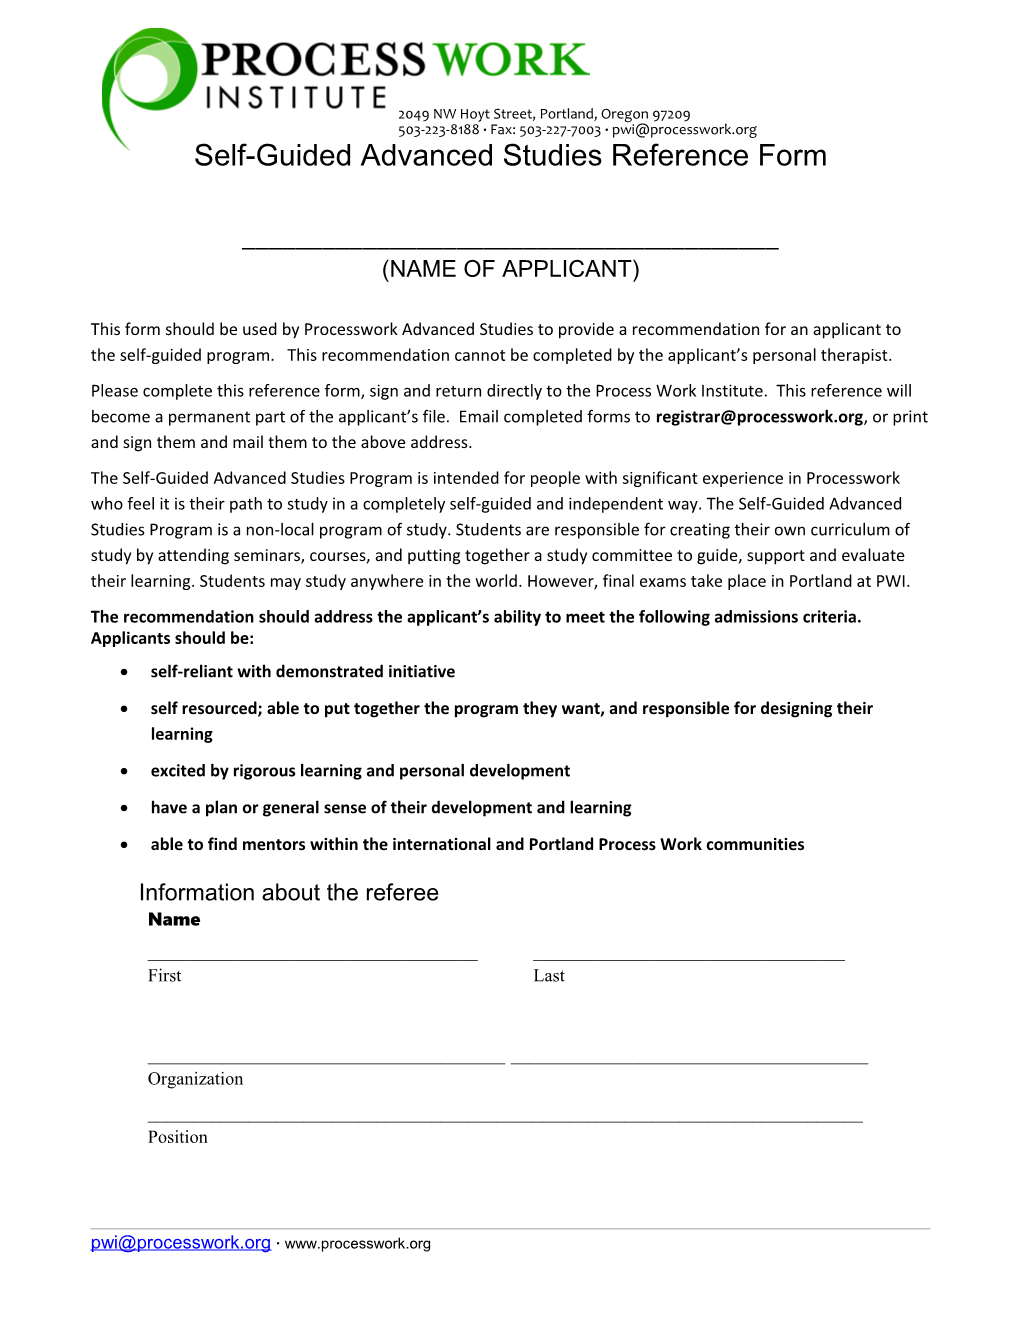 Self-Guided Advanced Studies Reference Form